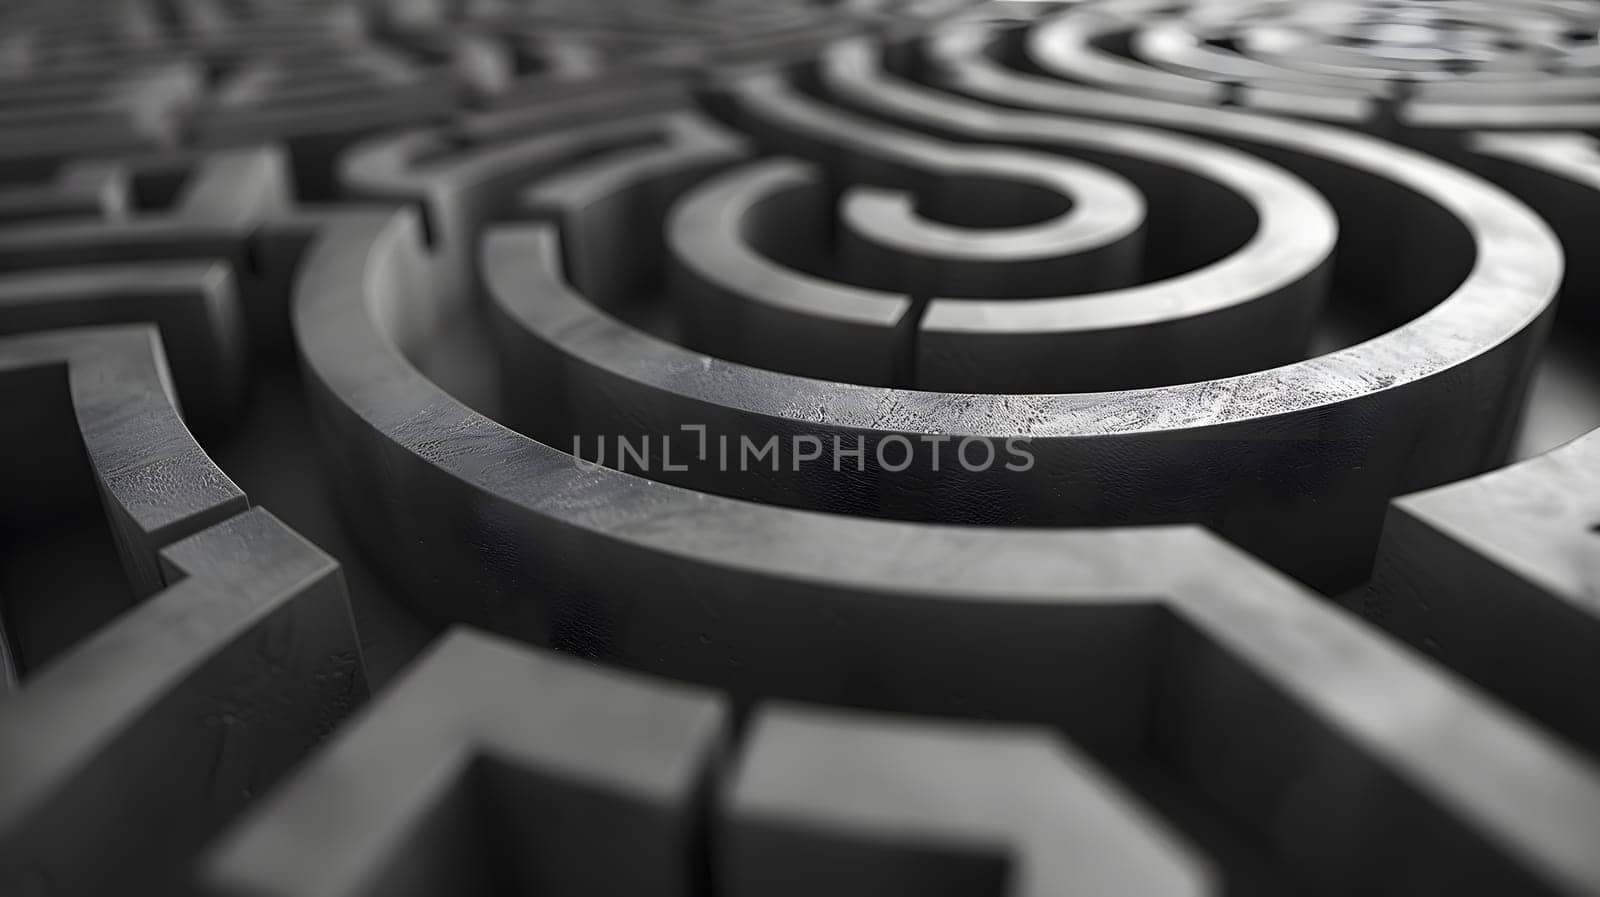 A mesmerizing labyrinth maze captured in a black and white photo, featuring intricate patterns resembling an automotive tire on a road surface, showcasing urban design and symmetry